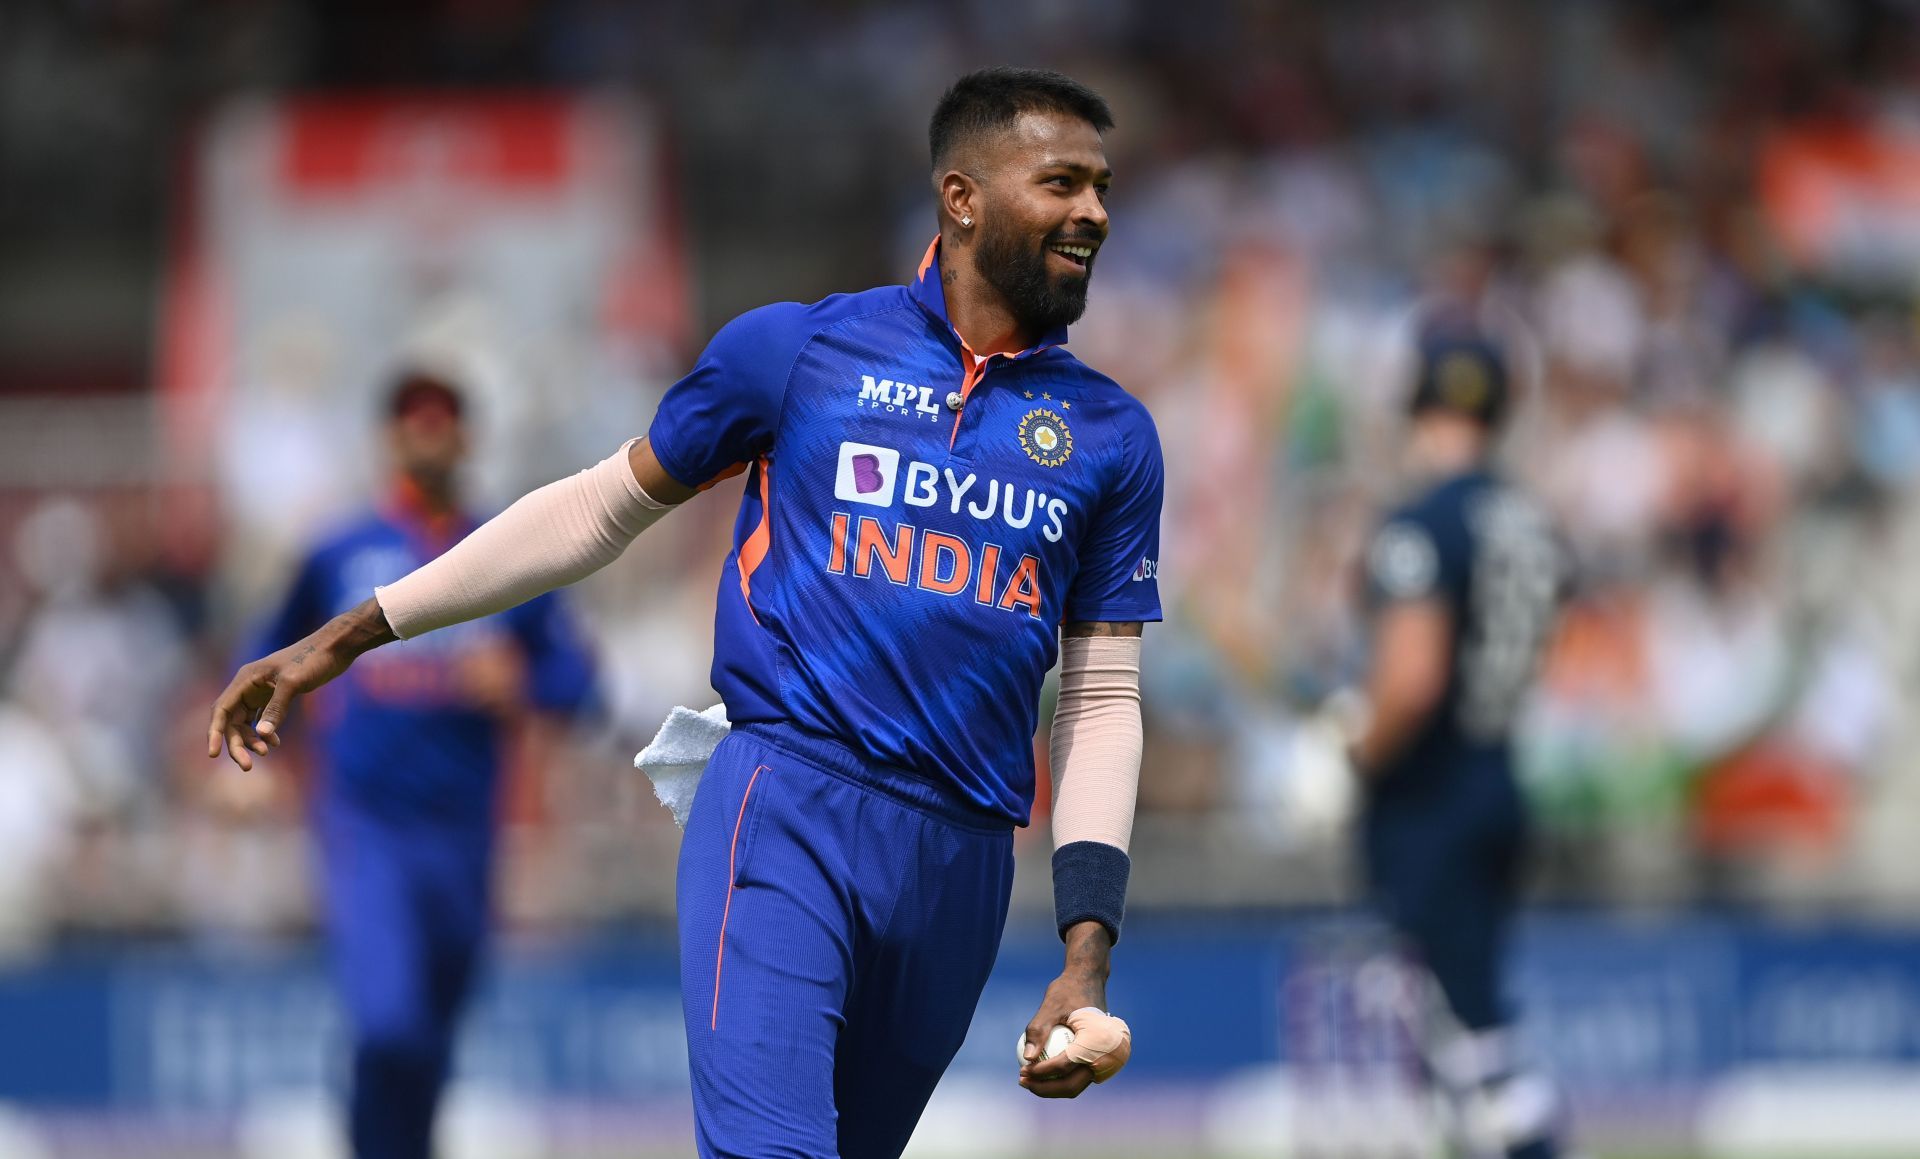 Hardik Pandya is one of the most prized assets for the Indian team